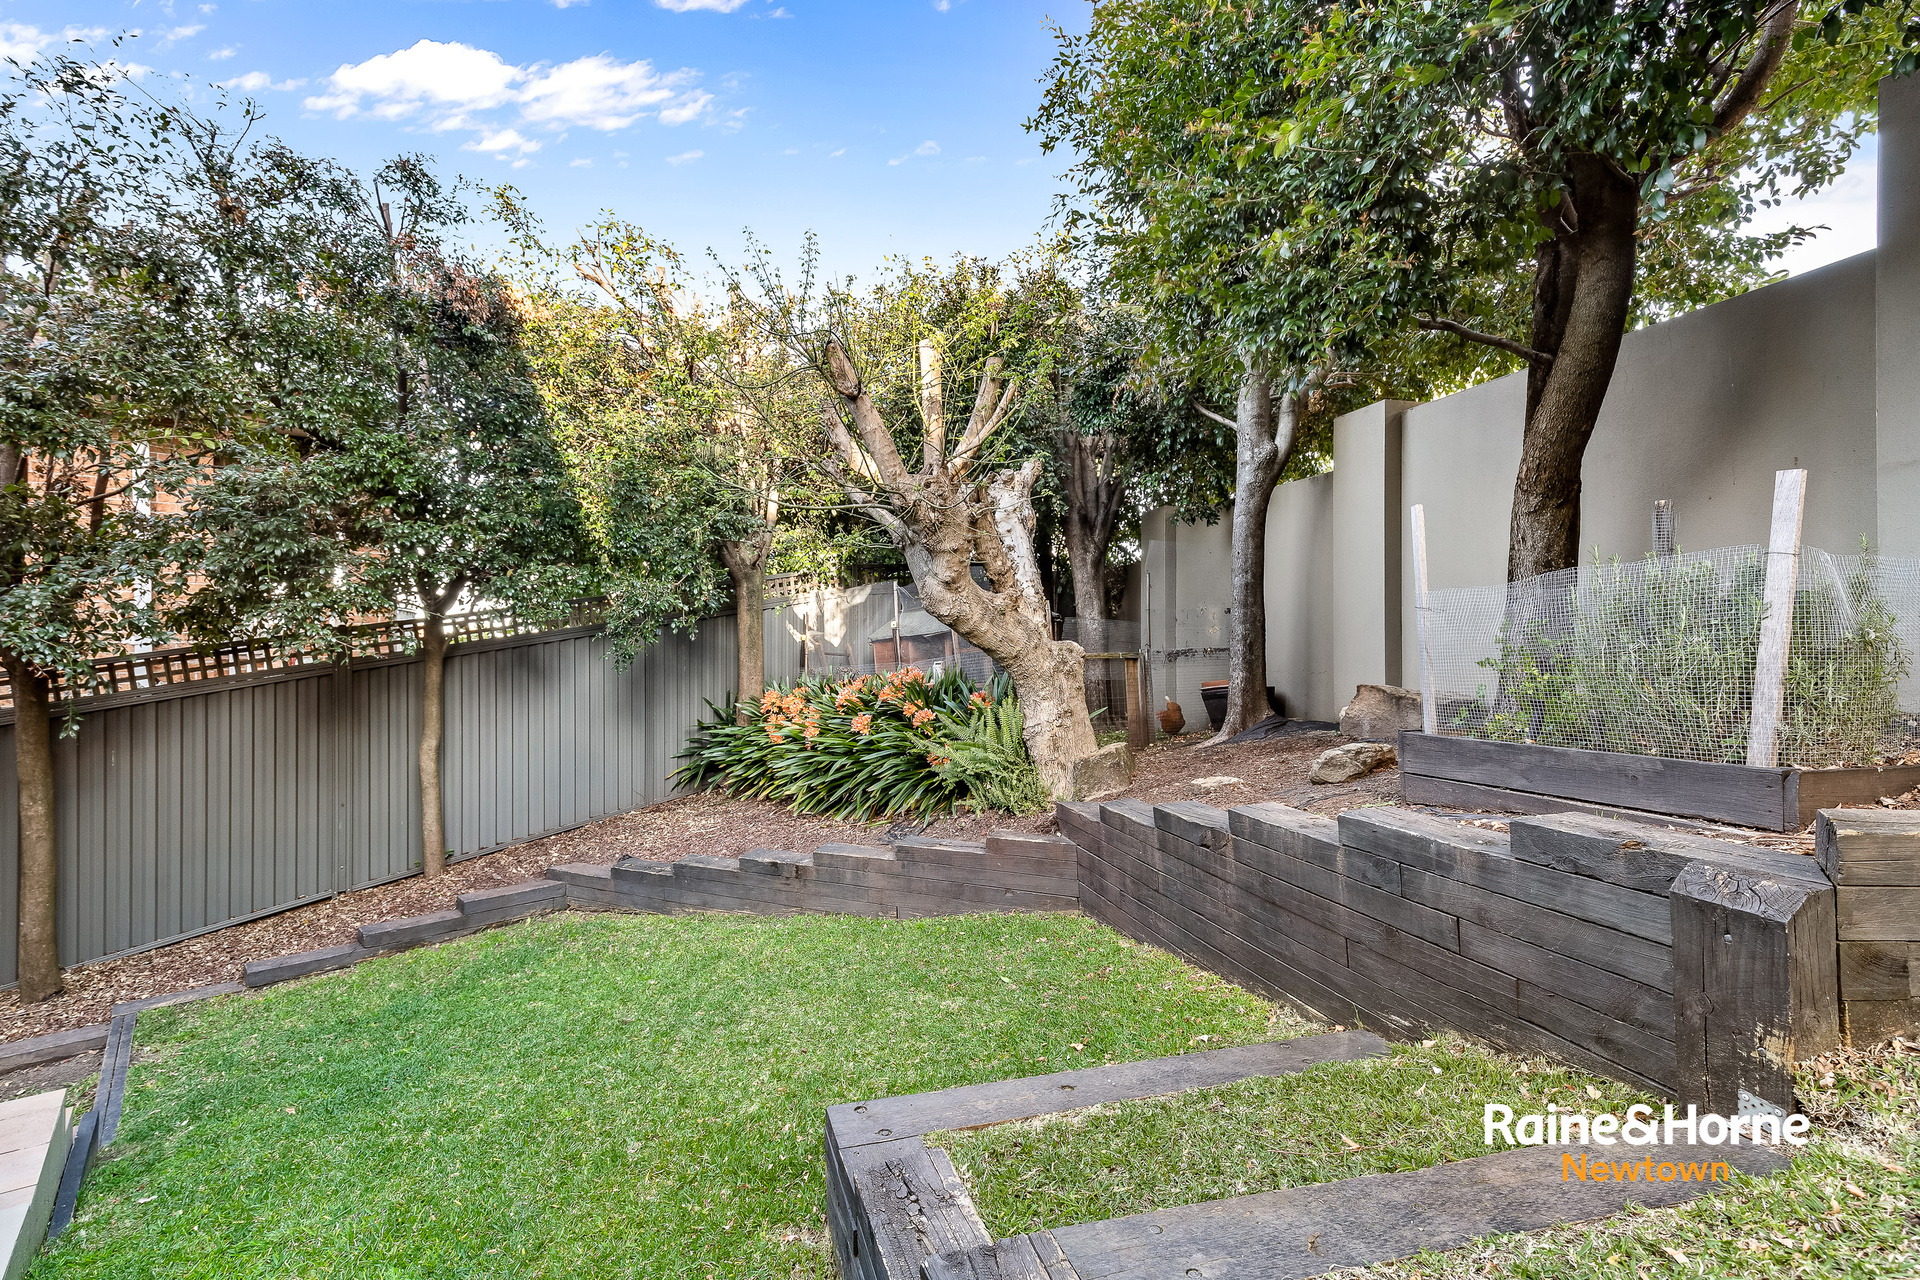 1A Undercliffe Lane, Earlwood Leased by Raine & Horne Newtown - image 1